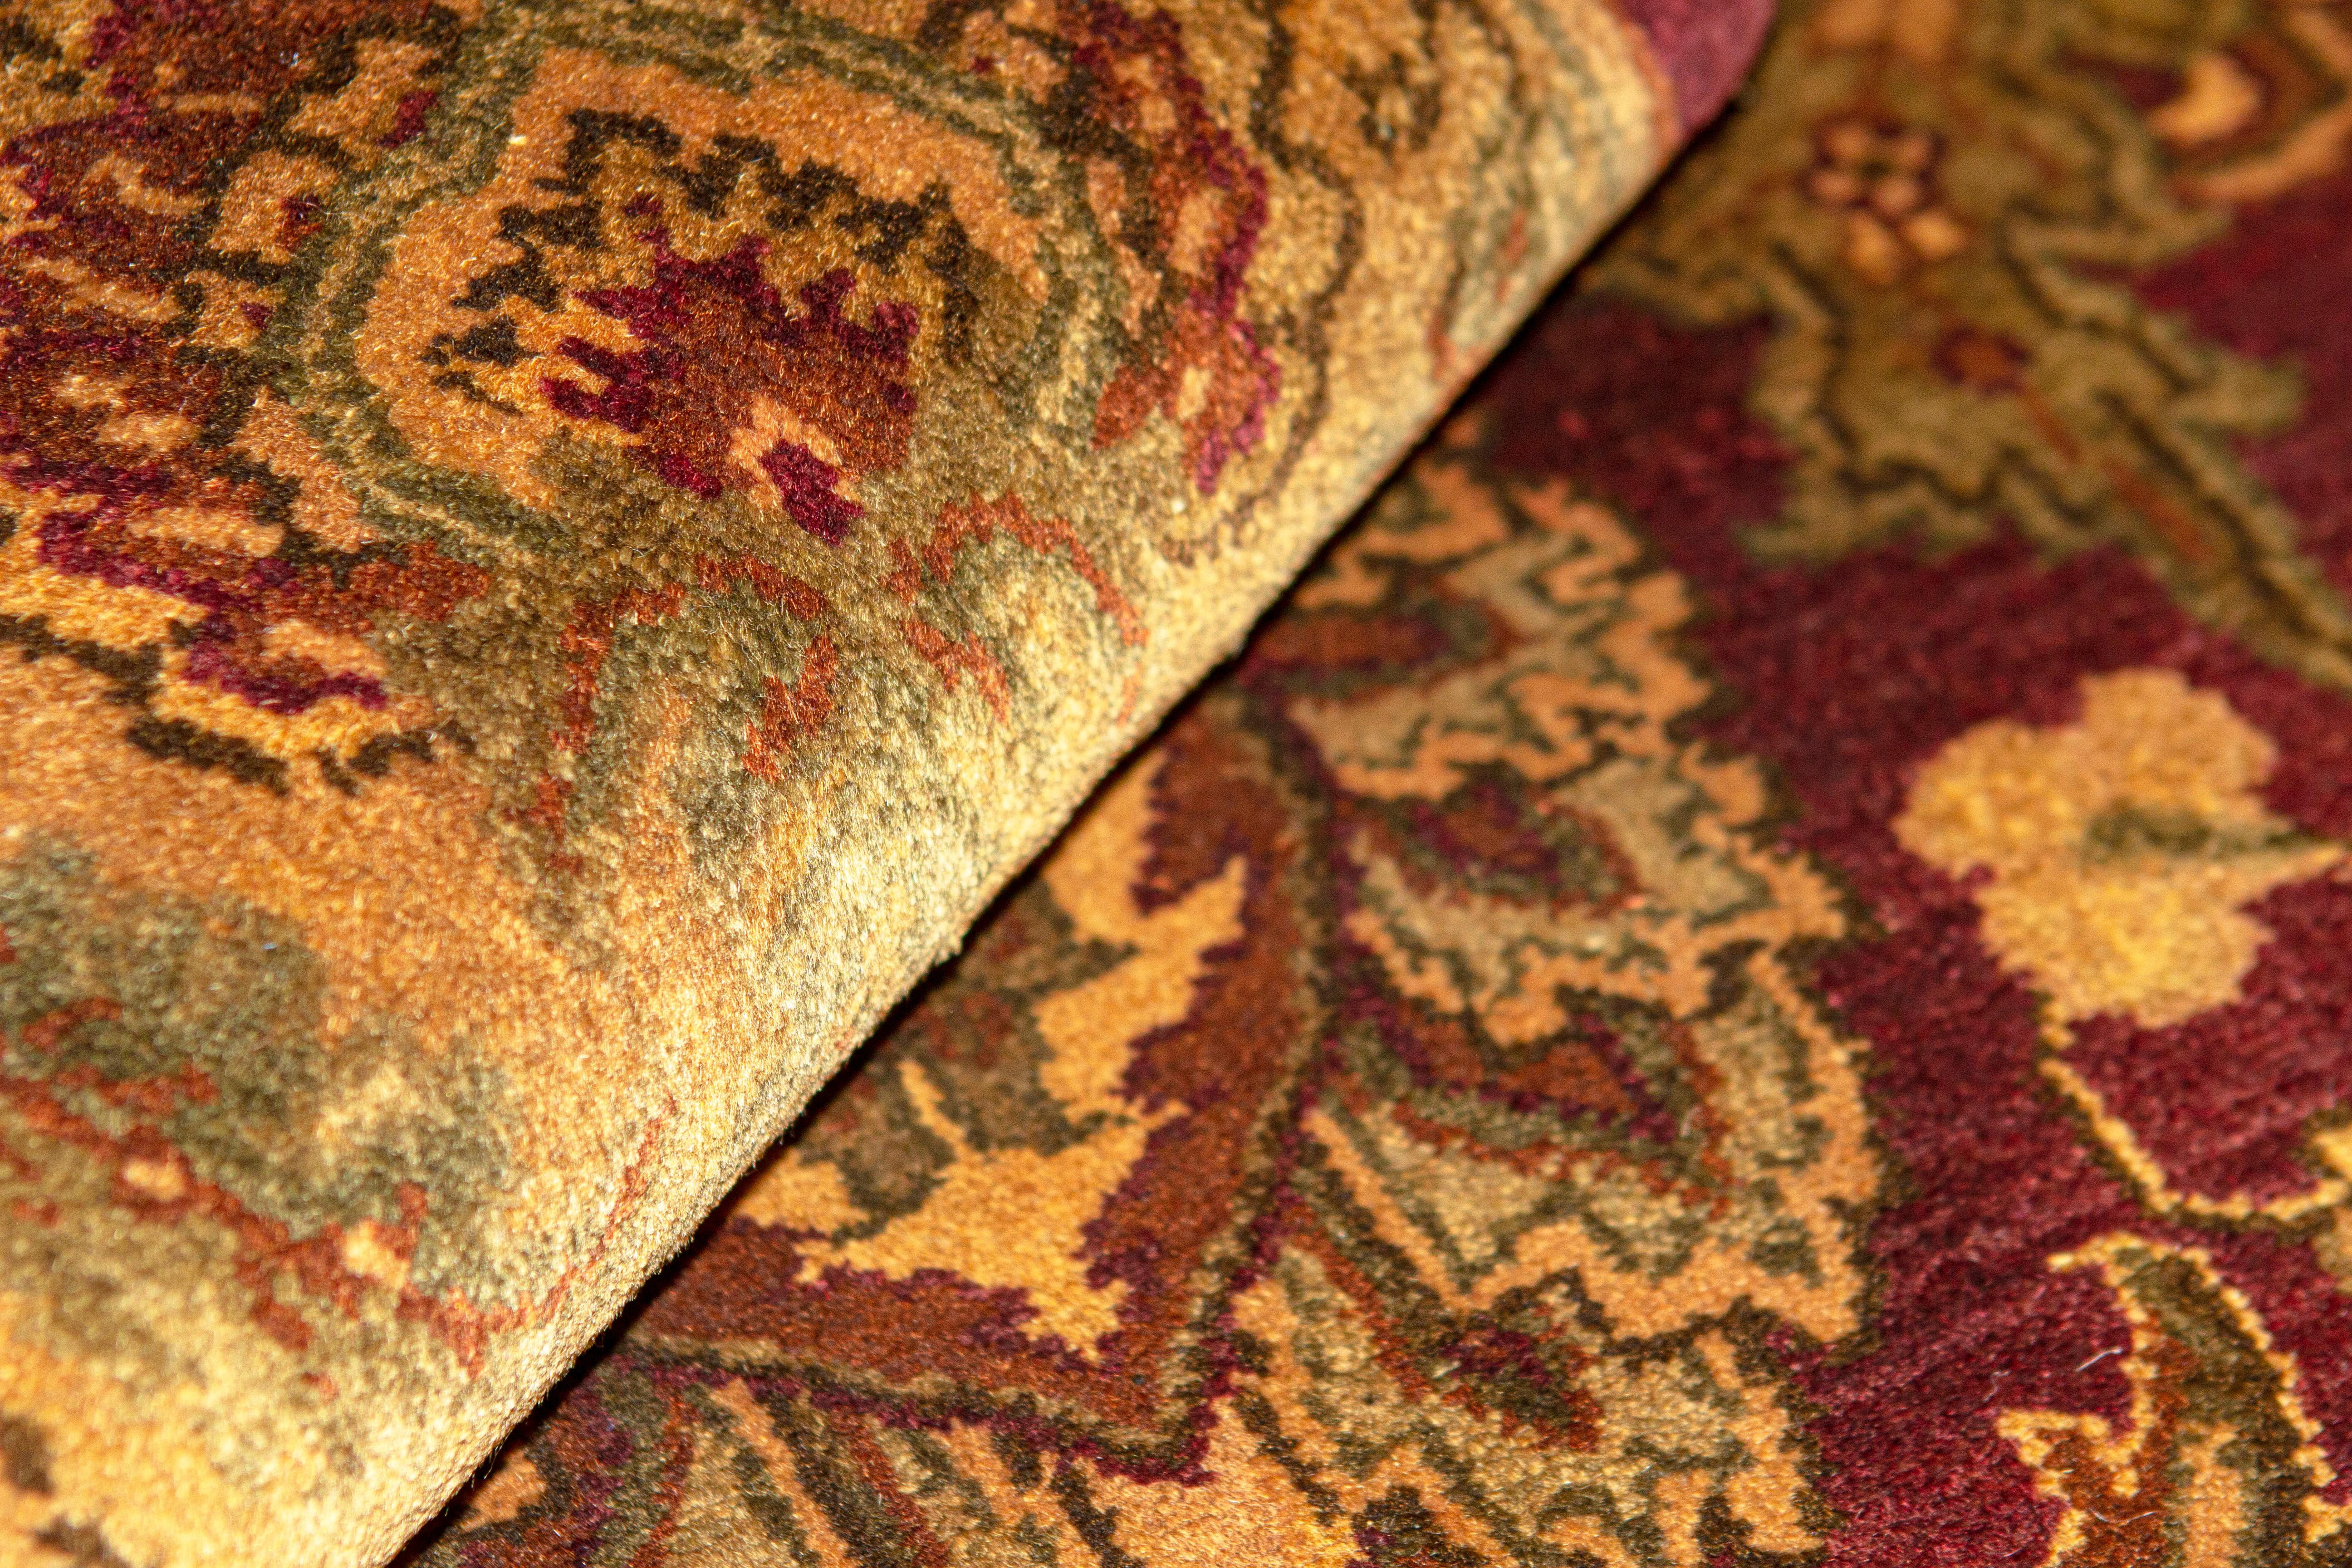 The inspiration for this collection comes from 16th century Indian carpet weavers, who created the most beautiful carpets for the Royal Courts of the Mogul Emperors. Based on authentic Oriental designs and hand woven in the traditional style.